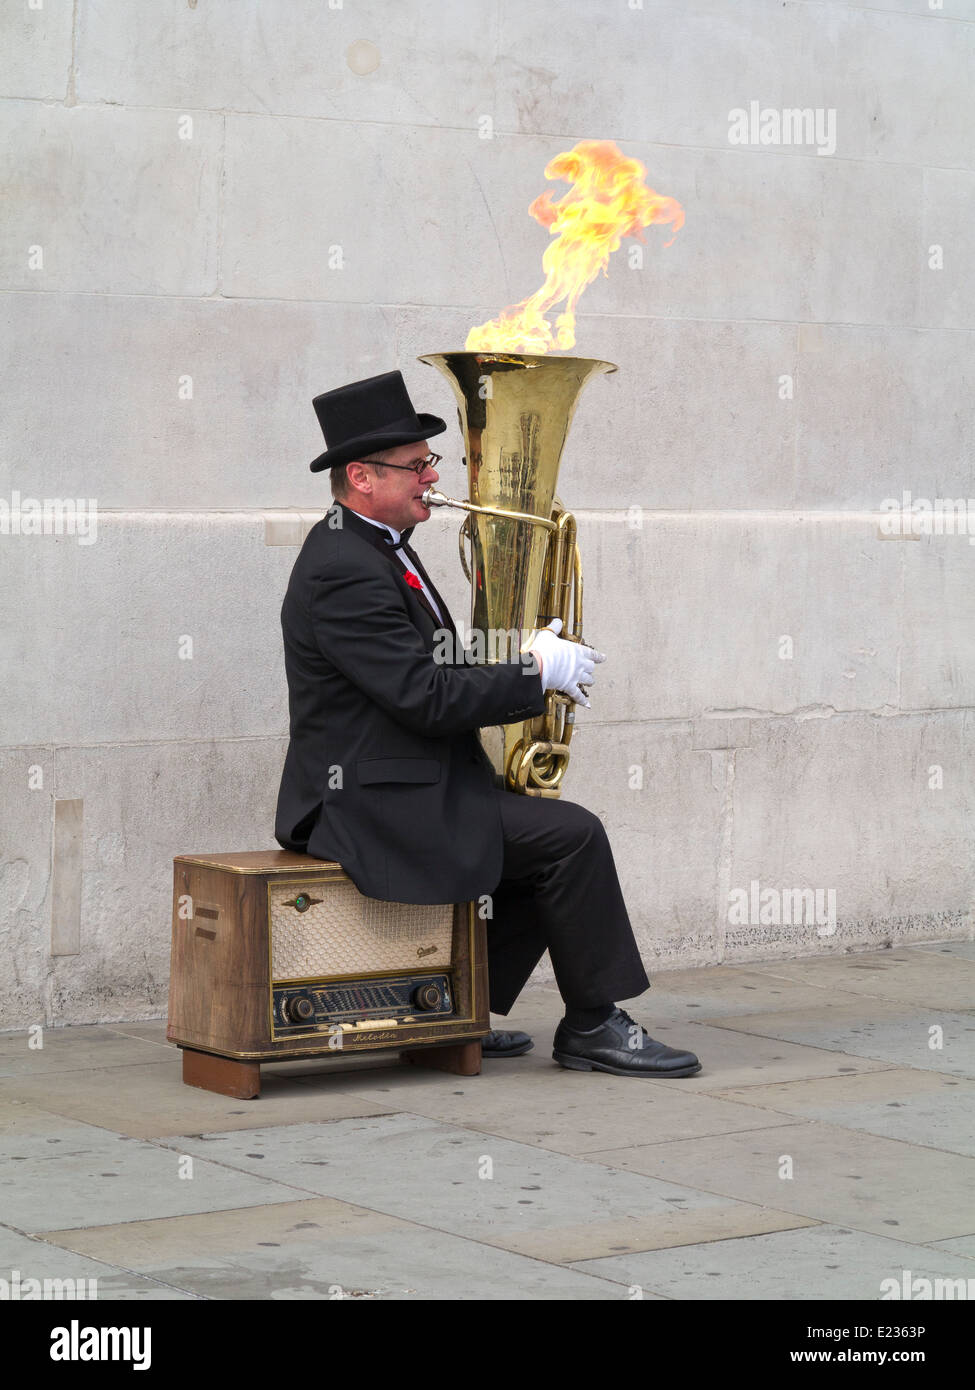 Busker, Christopher Werkowicz playing his flaming tuba sitting on an old radio against a plain stone wall London England Stock Photo